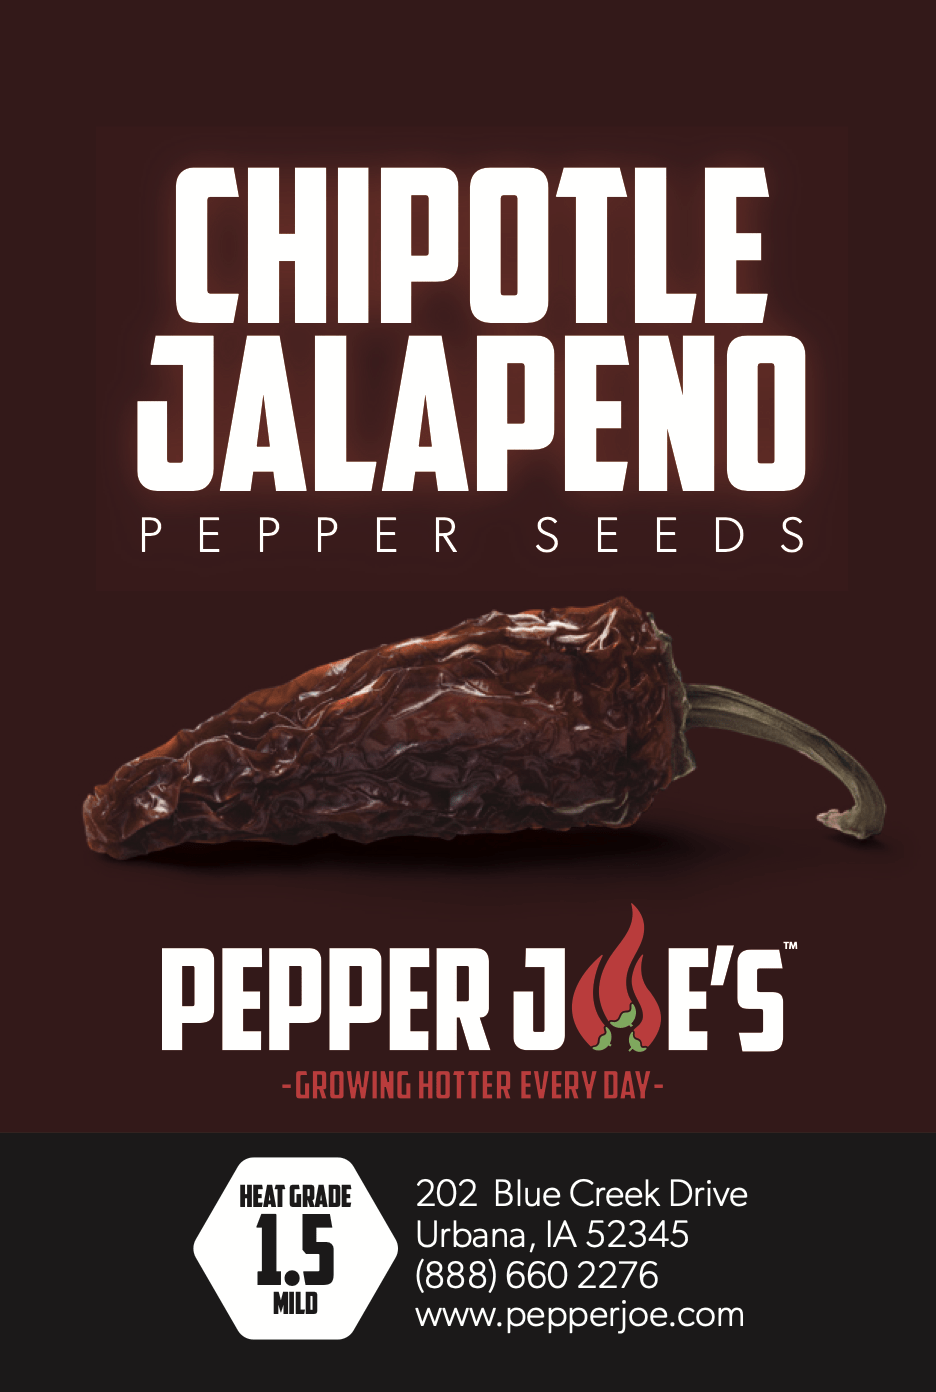 Pepper Joe's Chipotle Jalapeno seeds - seed label